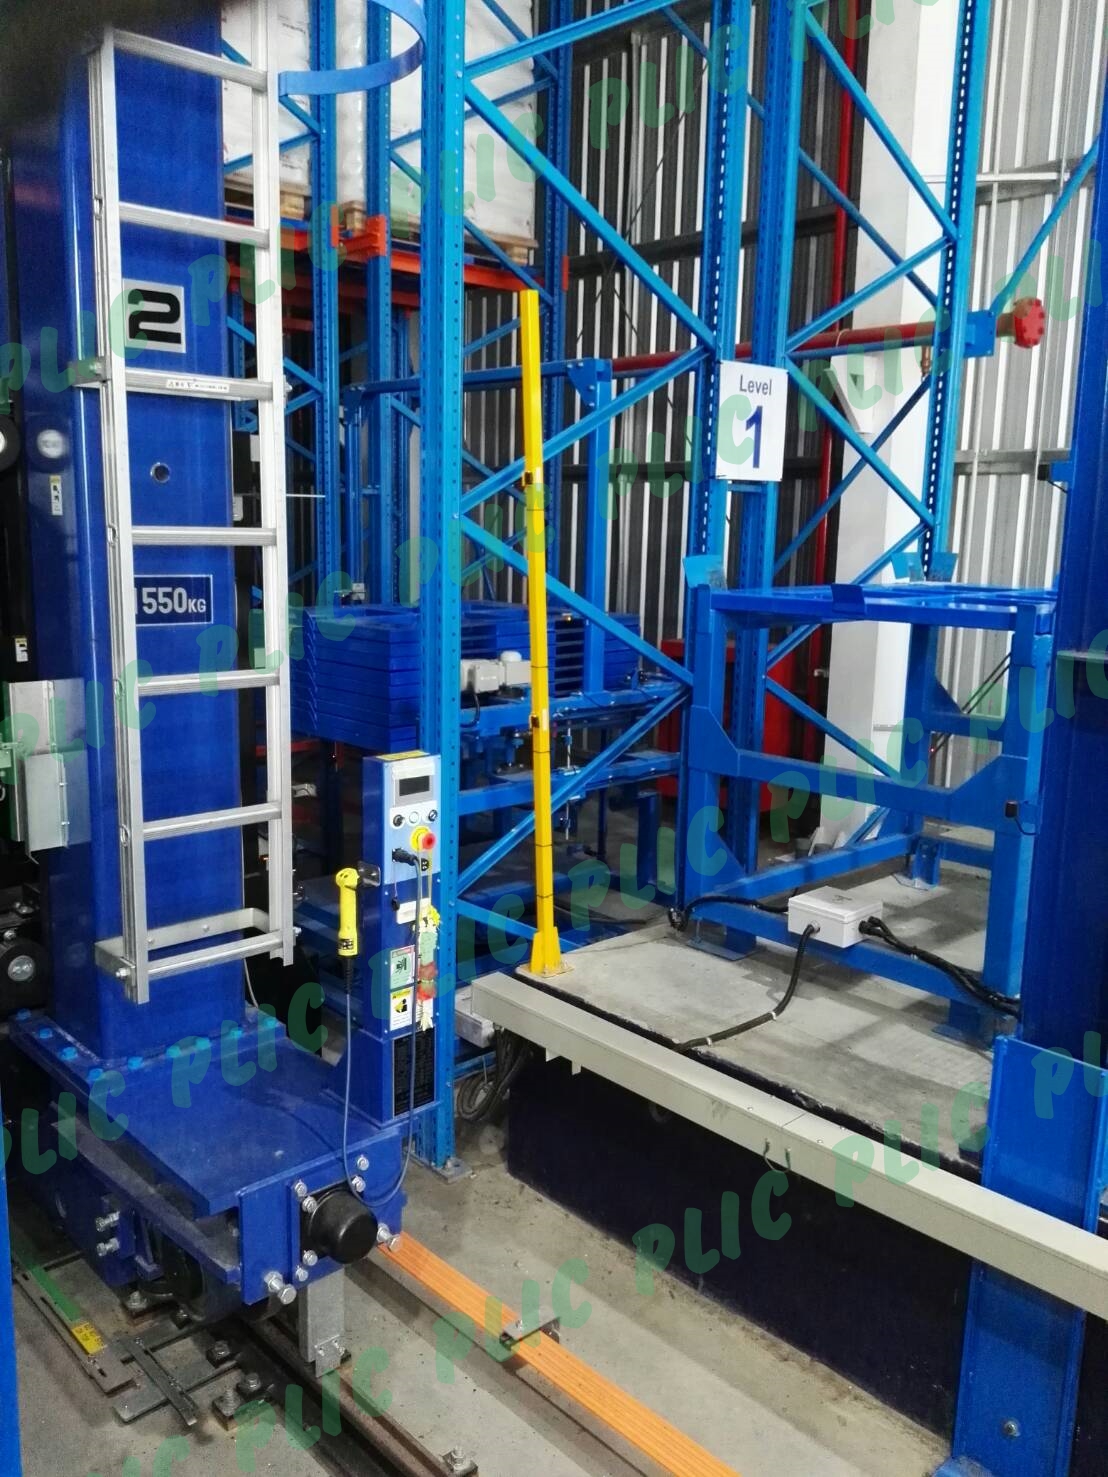 Automated storage and retrieval system (AS/RS)